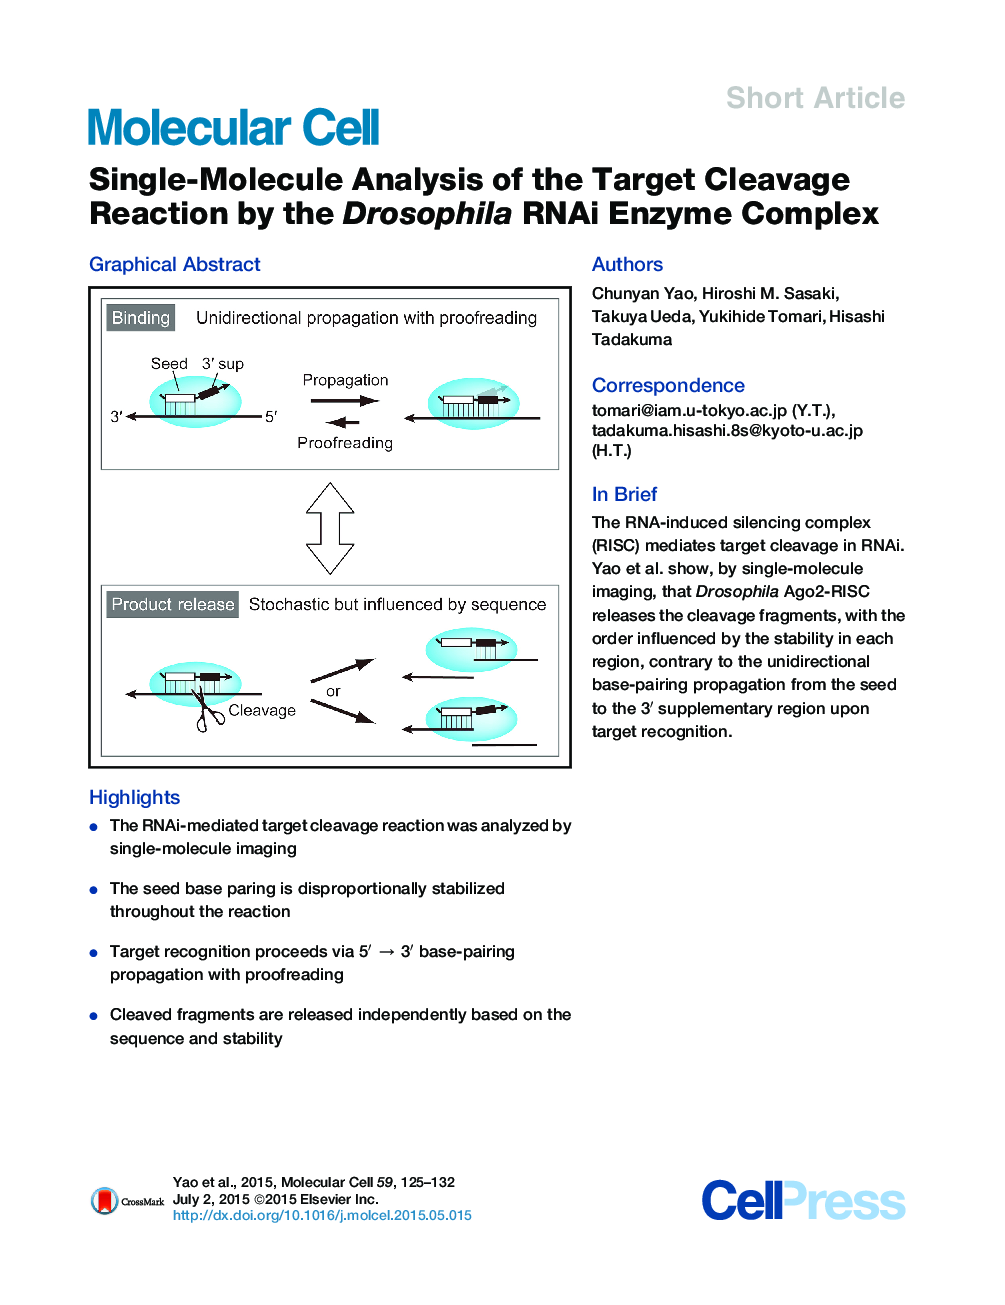 Single-Molecule Analysis of the Target Cleavage Reaction by the Drosophila RNAi Enzyme Complex